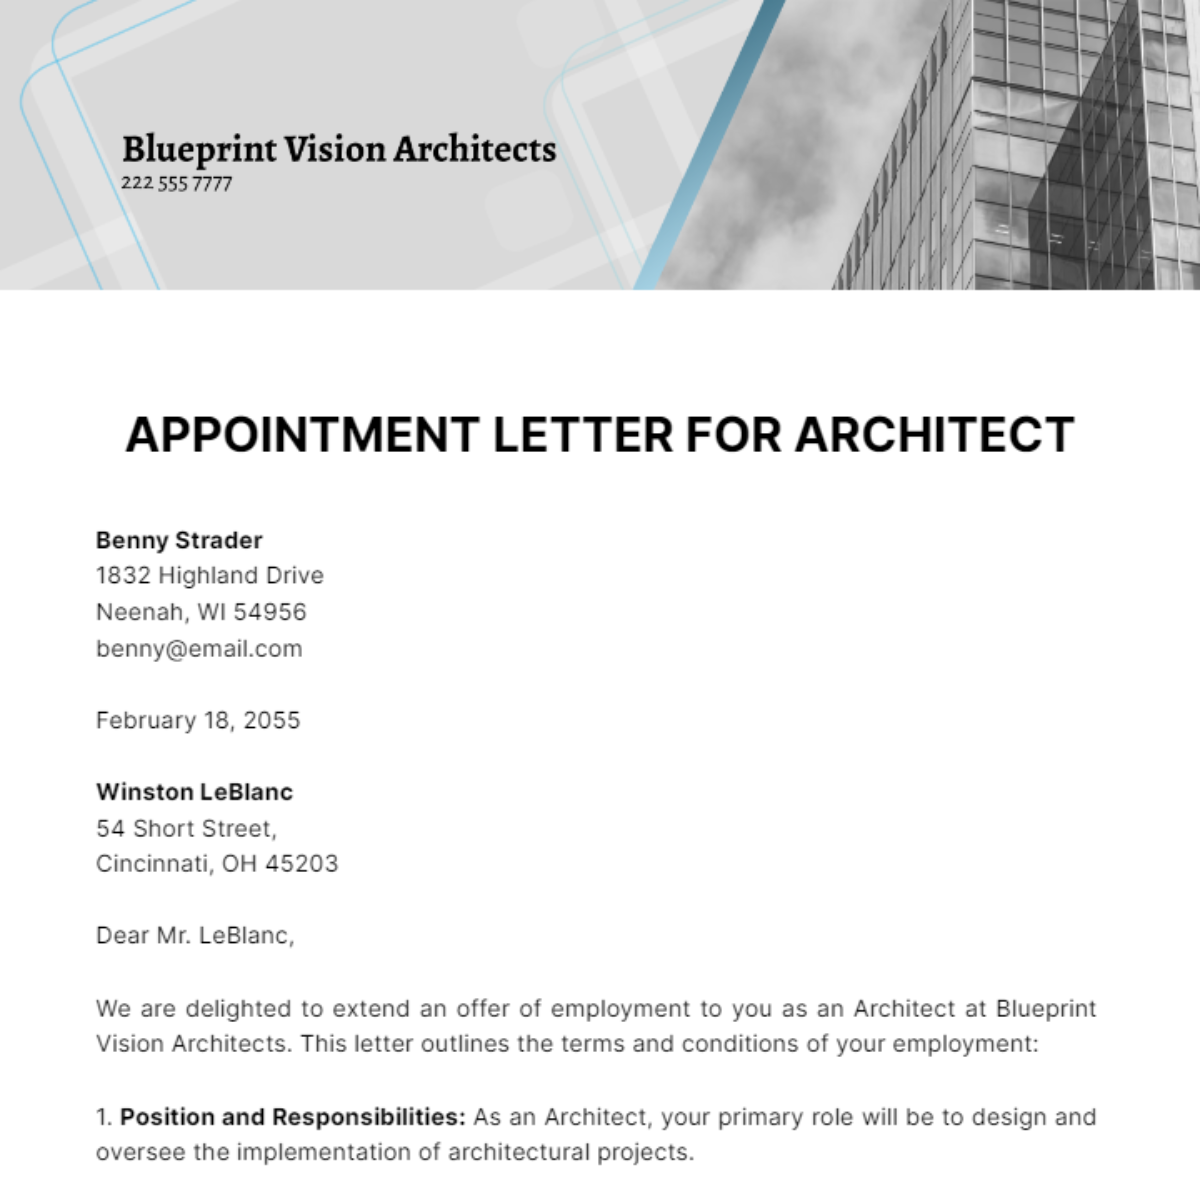 Appointment Letter for Architect Template